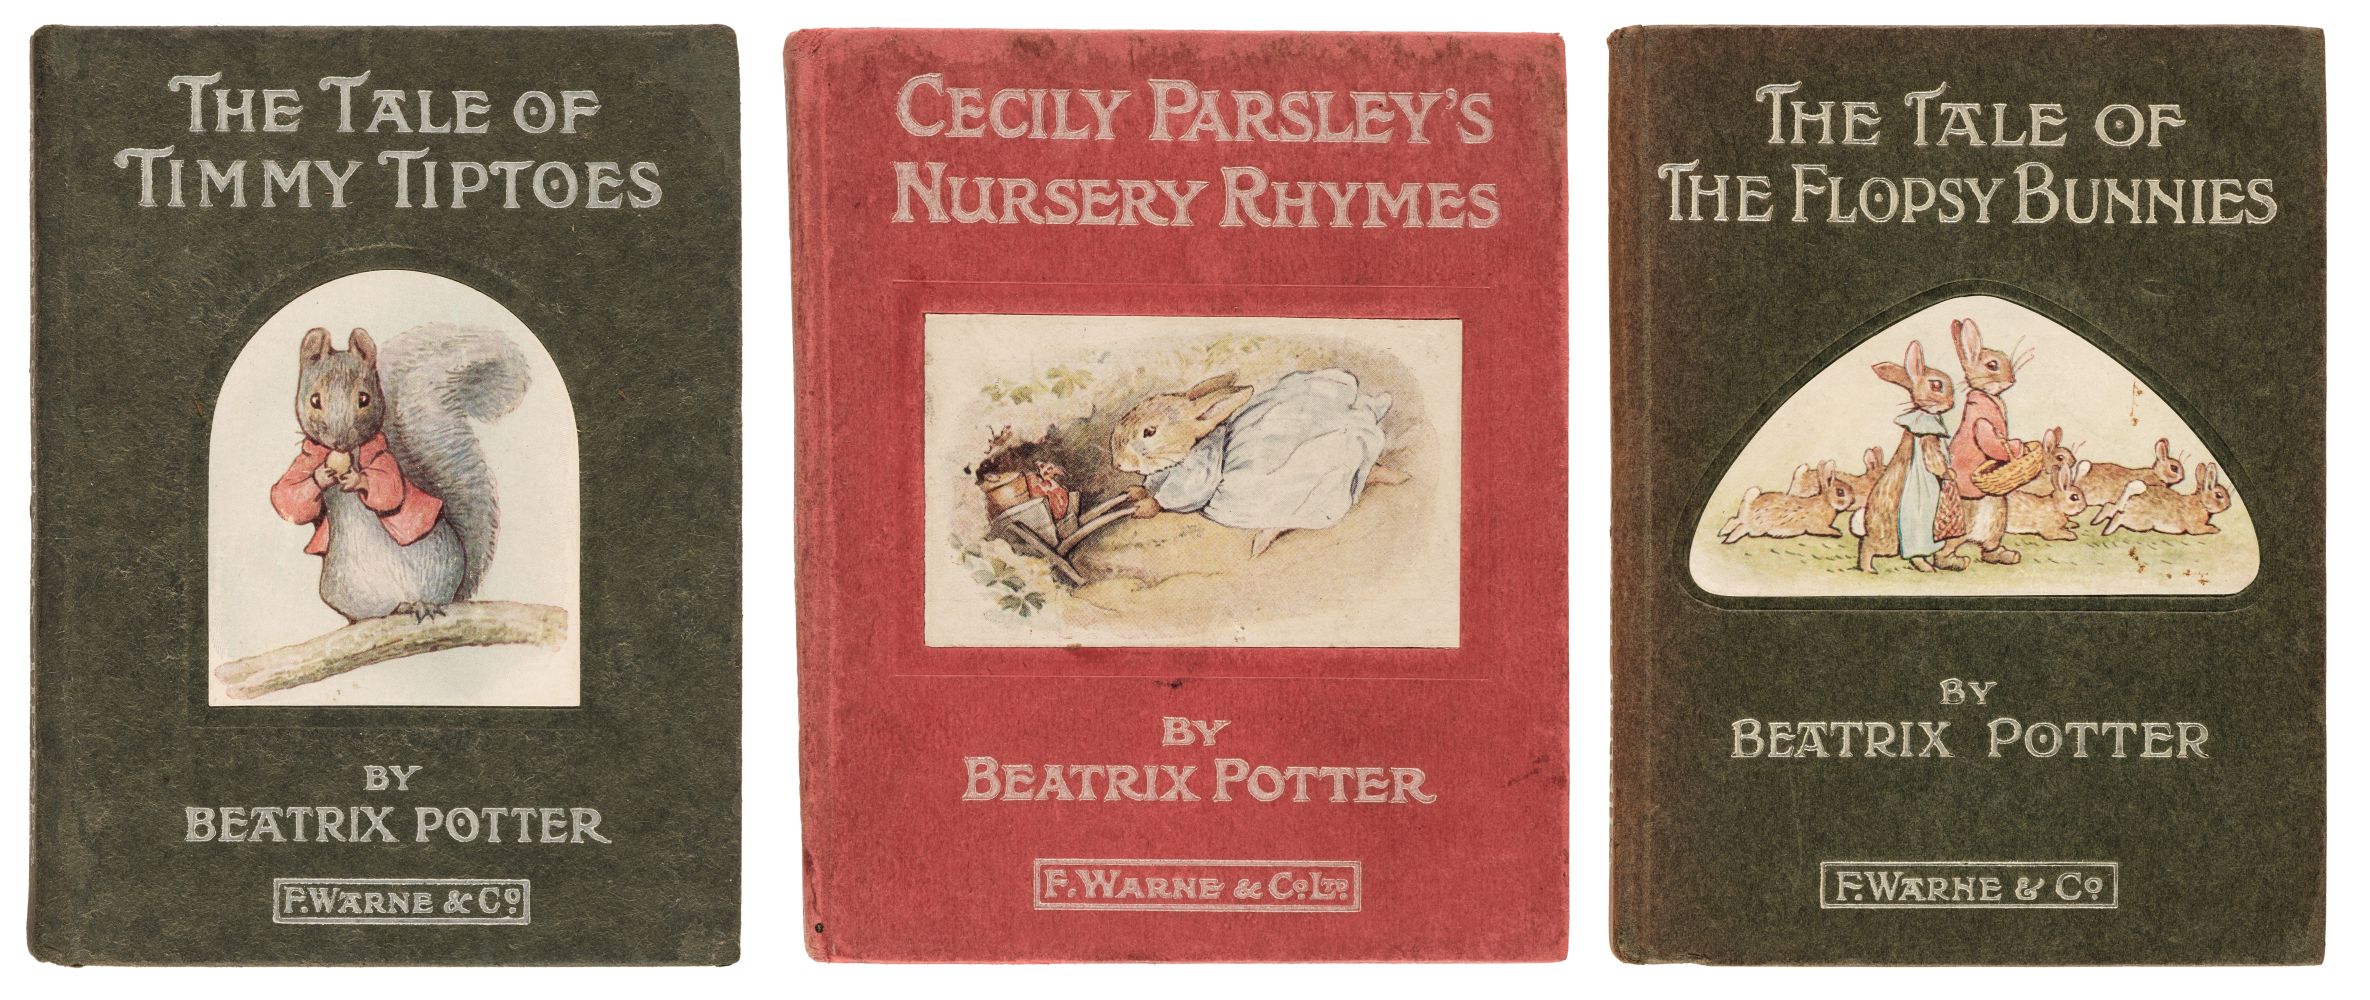 Potter (Beatrix). The Tale of The Flopsy Bunnies, 1st edition, Frederick Warne and Co, 1909